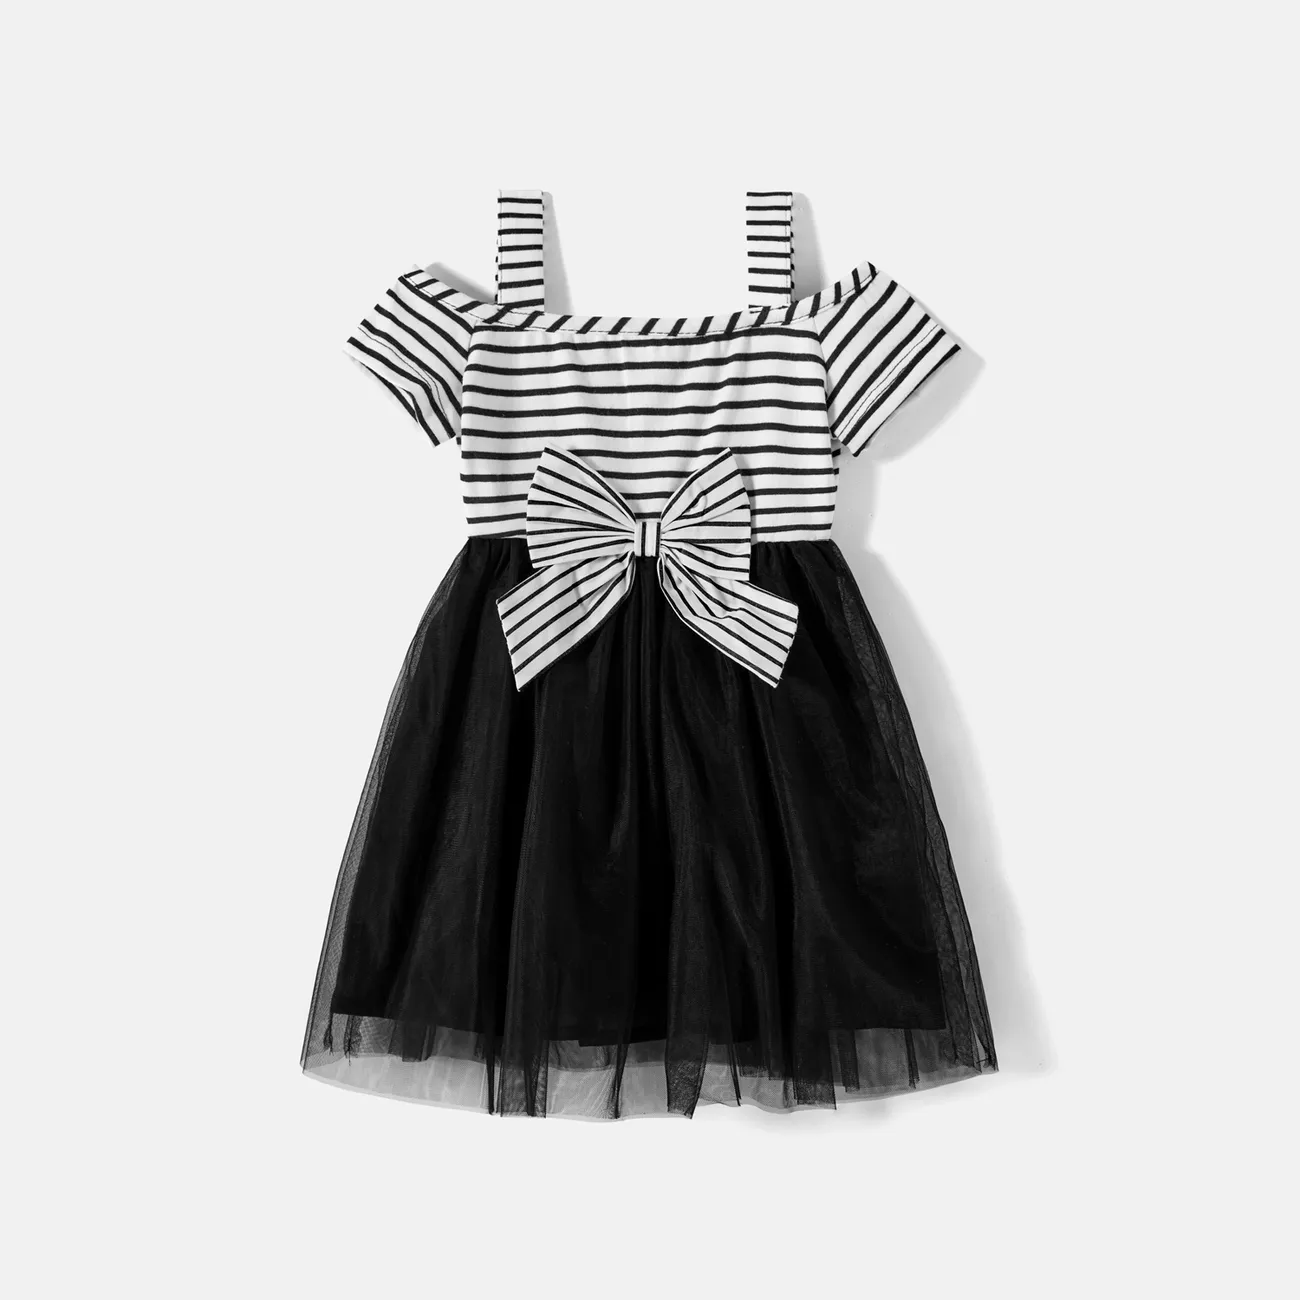 Family Matching Cotton Striped Short-sleeve T-shirts and Off Shoulder Belted Spliced Dresses Sets BlackandWhite big image 1